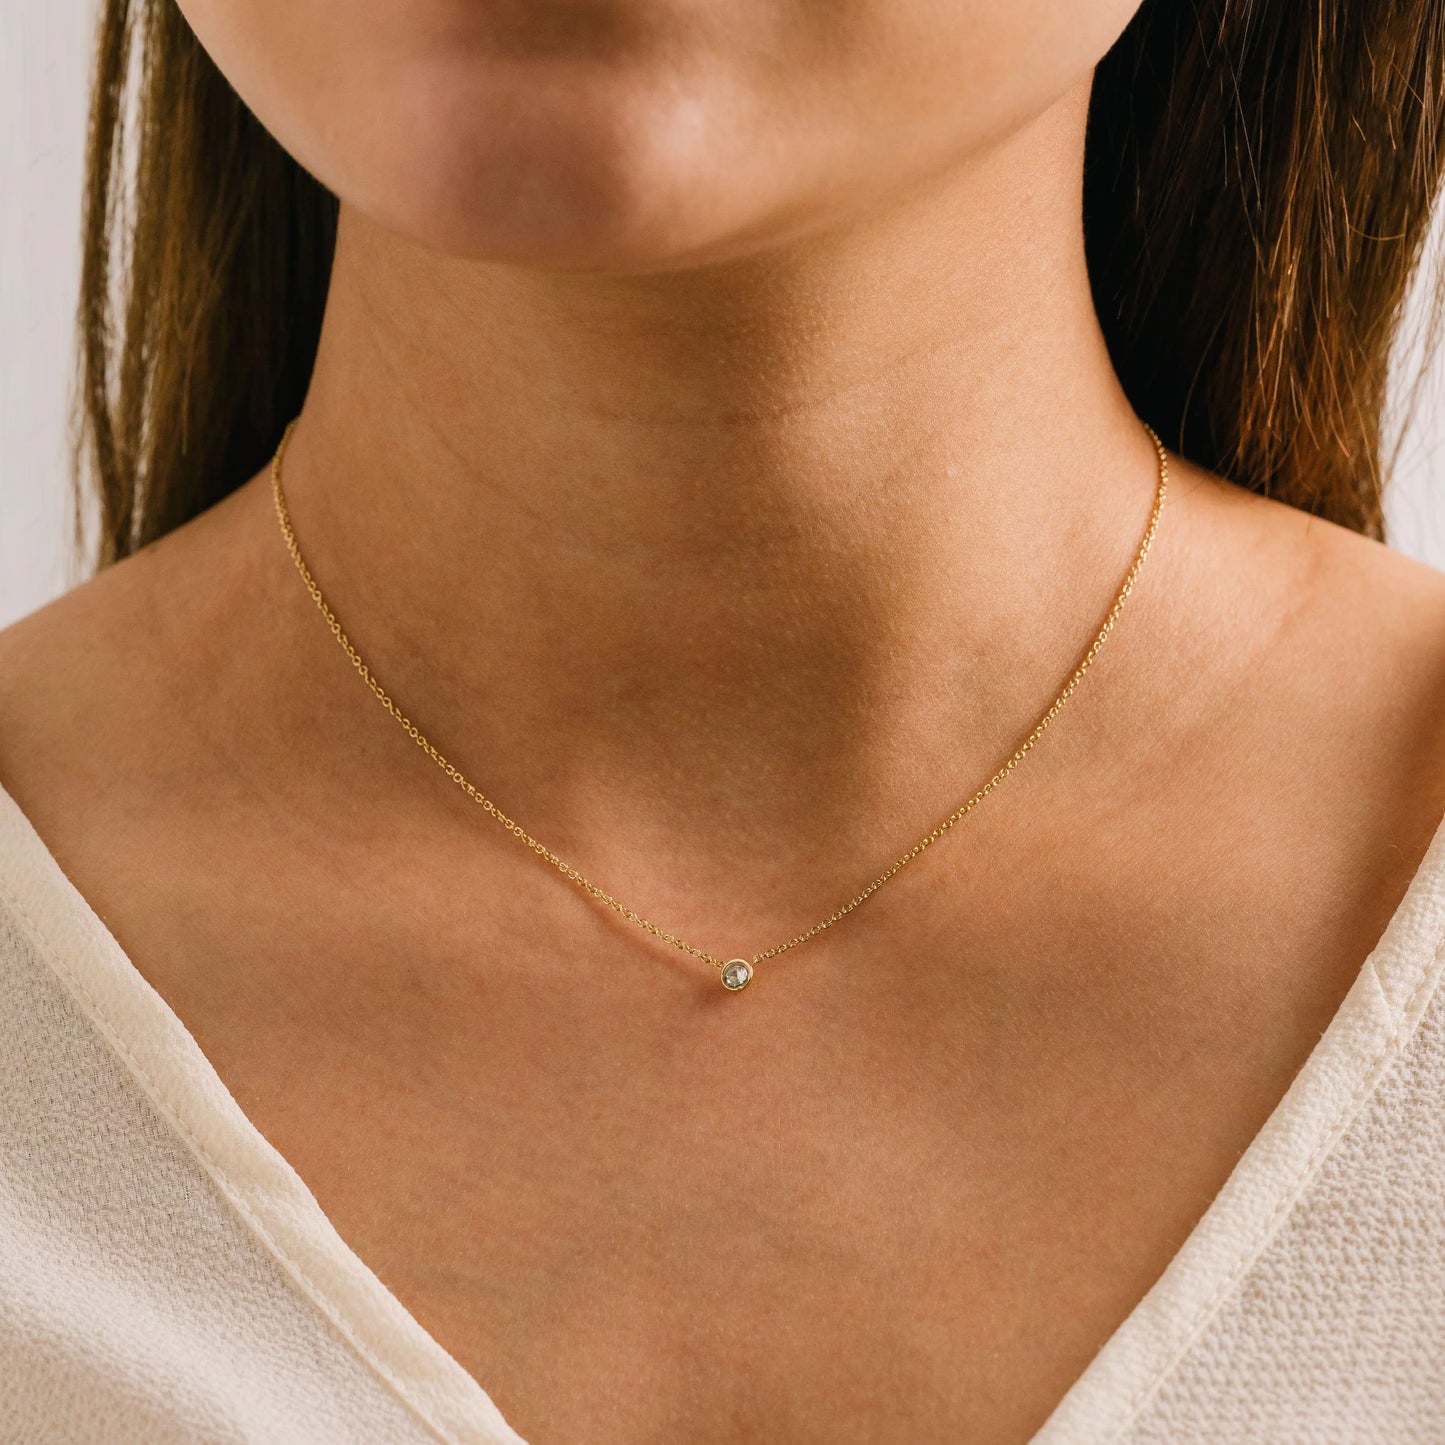 Gold Solitaire Necklace